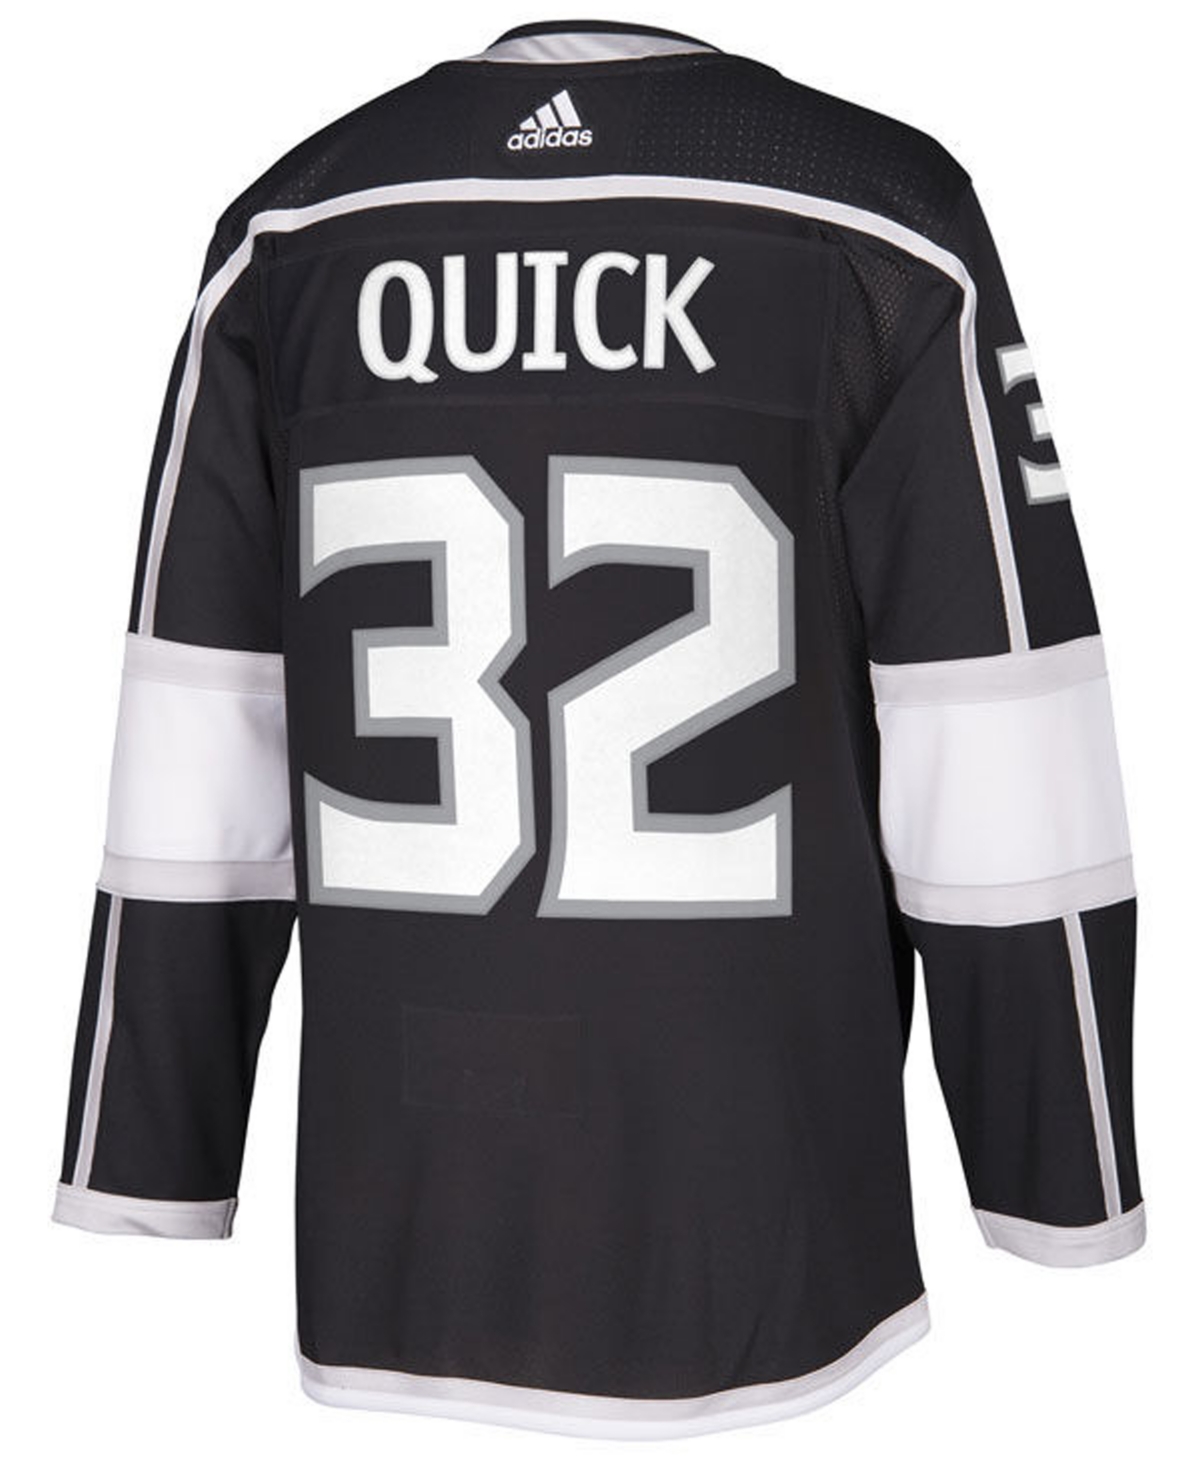 adidas Men's Jonathan Quick Los Angeles Kings Authentic Player Jersey